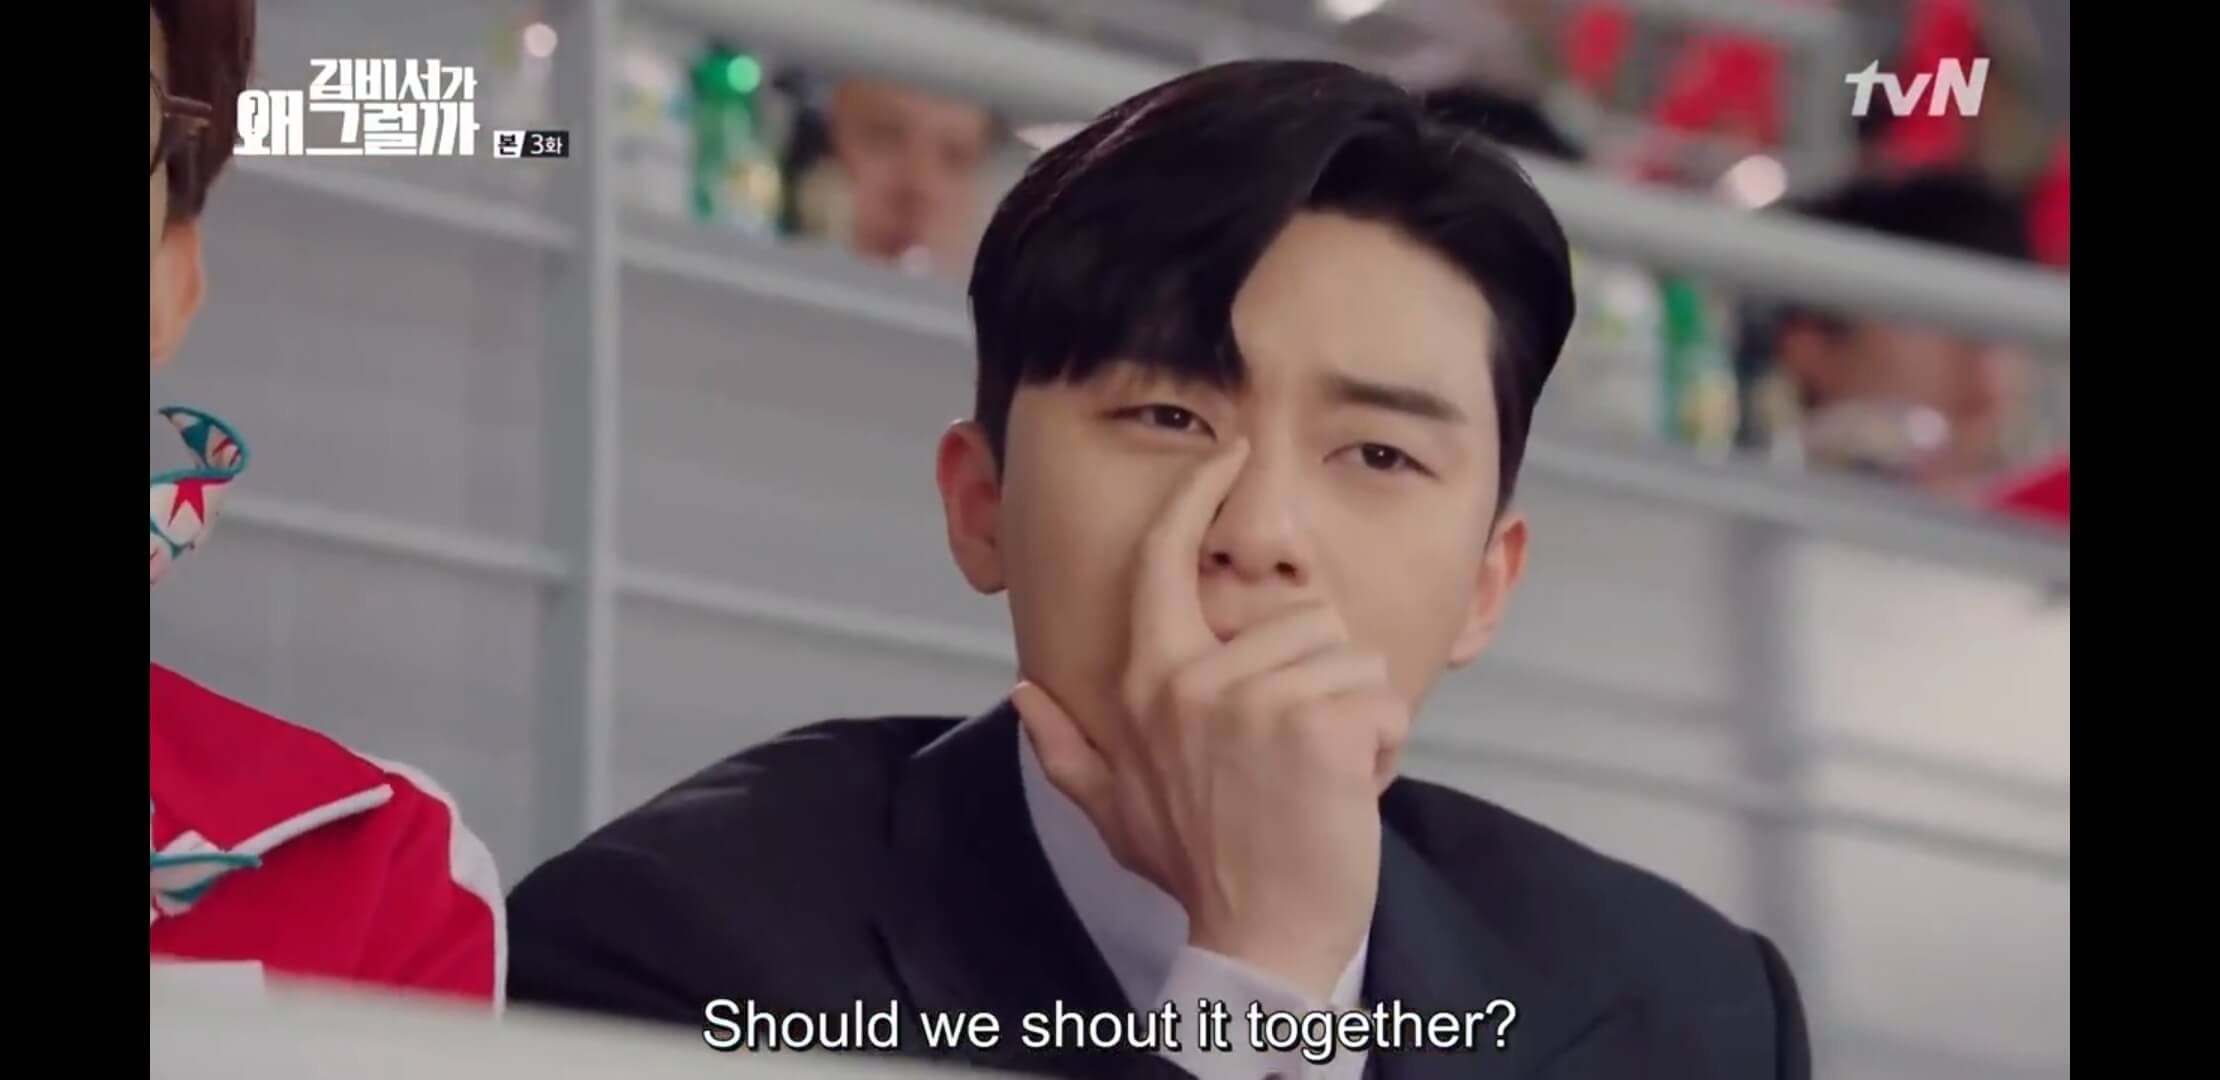 https://www.jazminemedia.com/wp-content/uploads/2018/06/“What’s-Wrong-With-Secretary-Kim”-Episode-3-And-4-Review-And-Recap.jpg